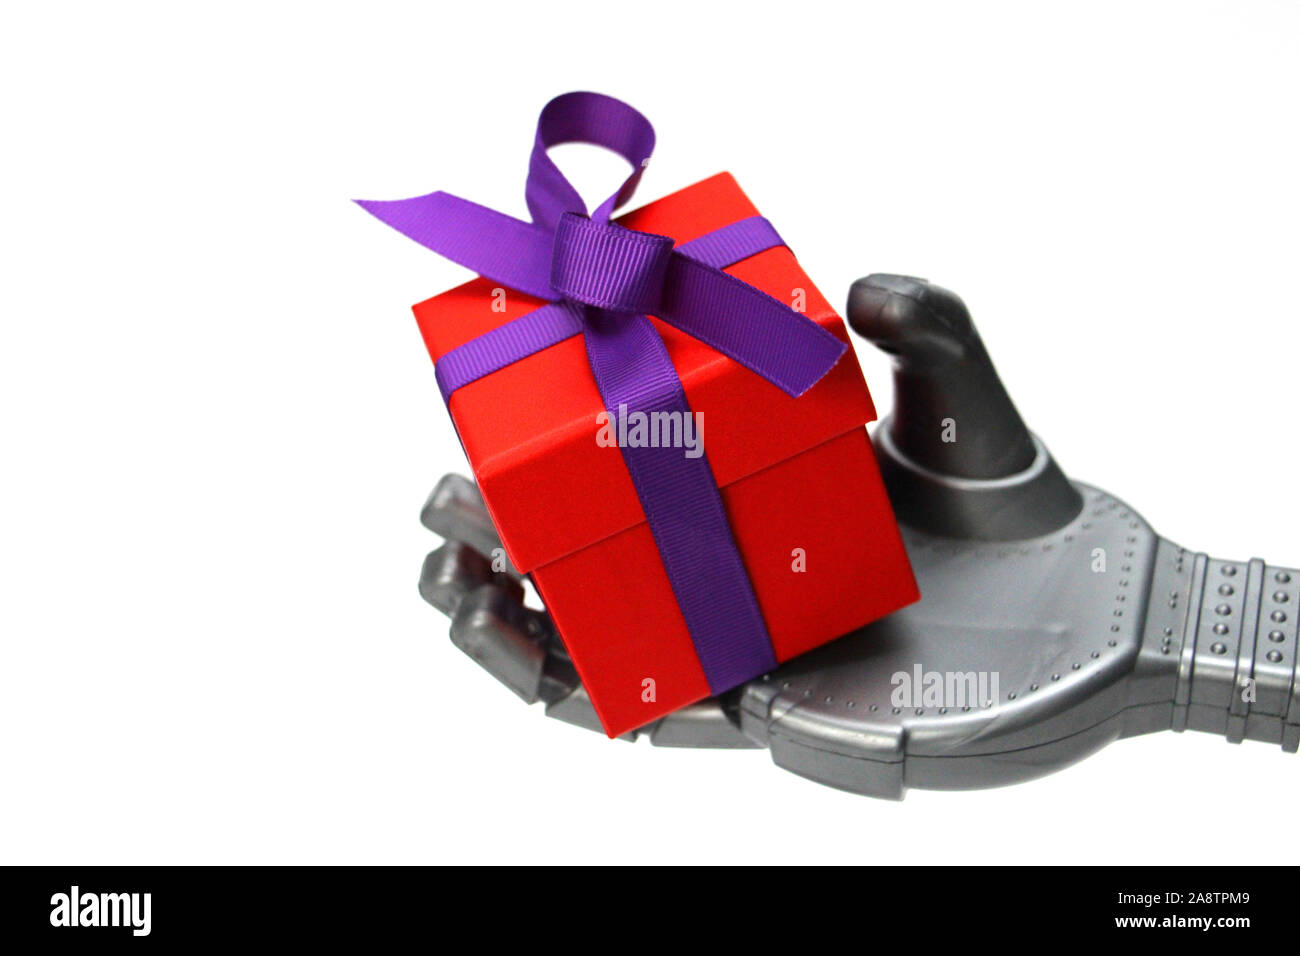 Robot hand holds a red gift box. The gift is tied with a beautiful purple bow. Smart robot gives gifts. New Year. Birthday. White background. Concept Stock Photo